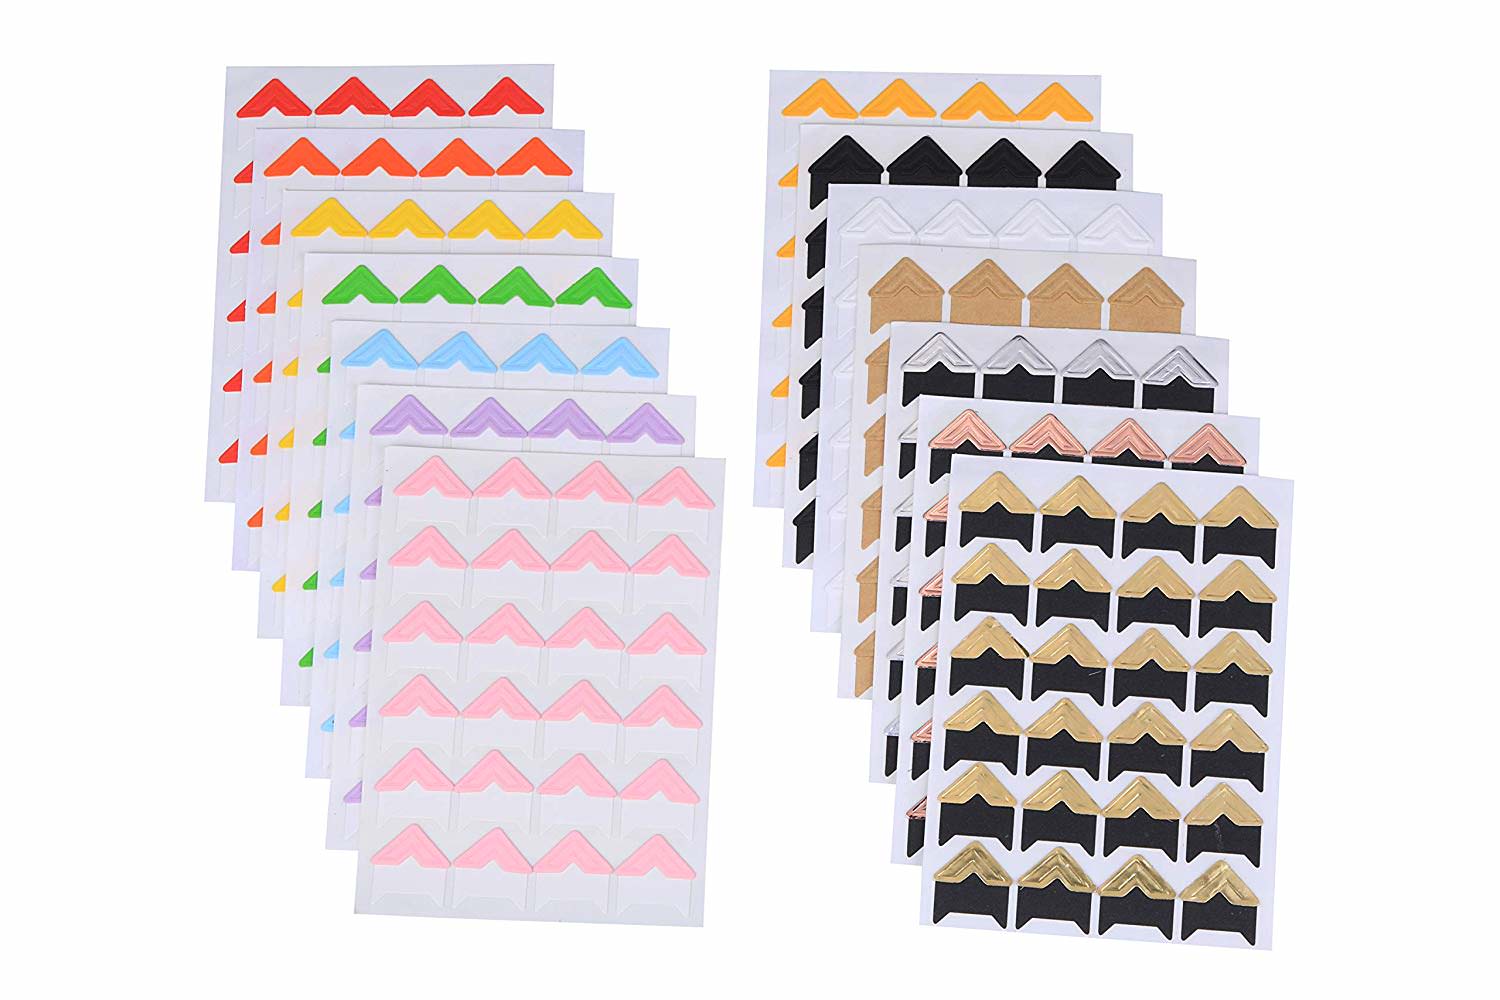 14 Sheets Multicolor Self Adhesive Photo Corners, Picture Corners for DIY  Scrapbook, Album, Photo Journal, Crafts, Photographs & Scrapbooking